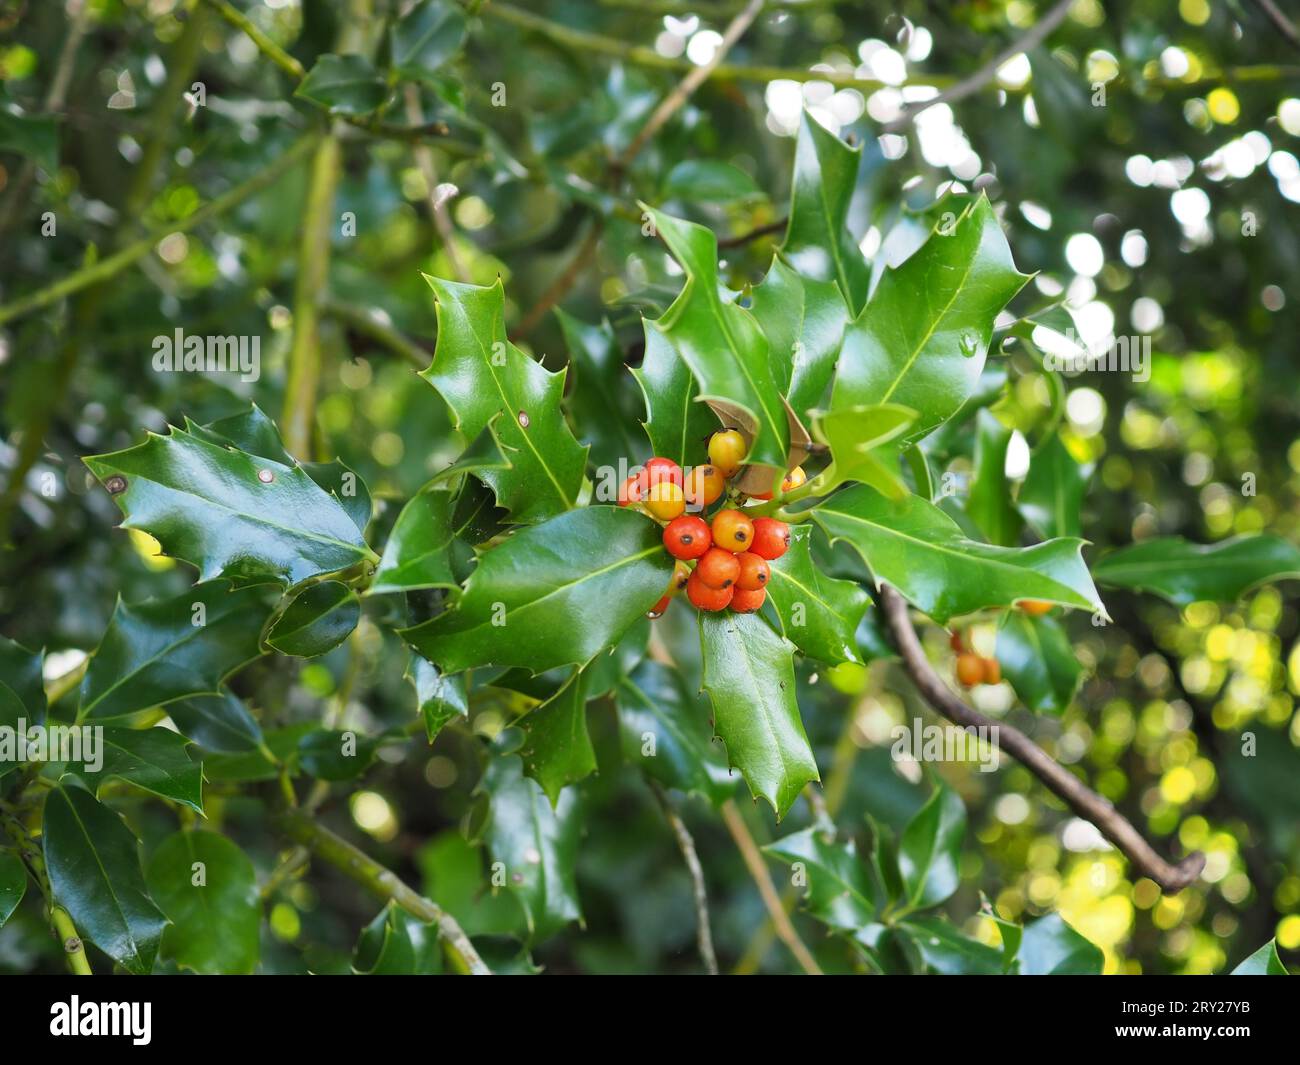 Ilex aquifolium (holly) growing outside in a British countryside hedgerow in autumn with ripening yellow and orange berries and shiny, spiky leaves Stock Photo